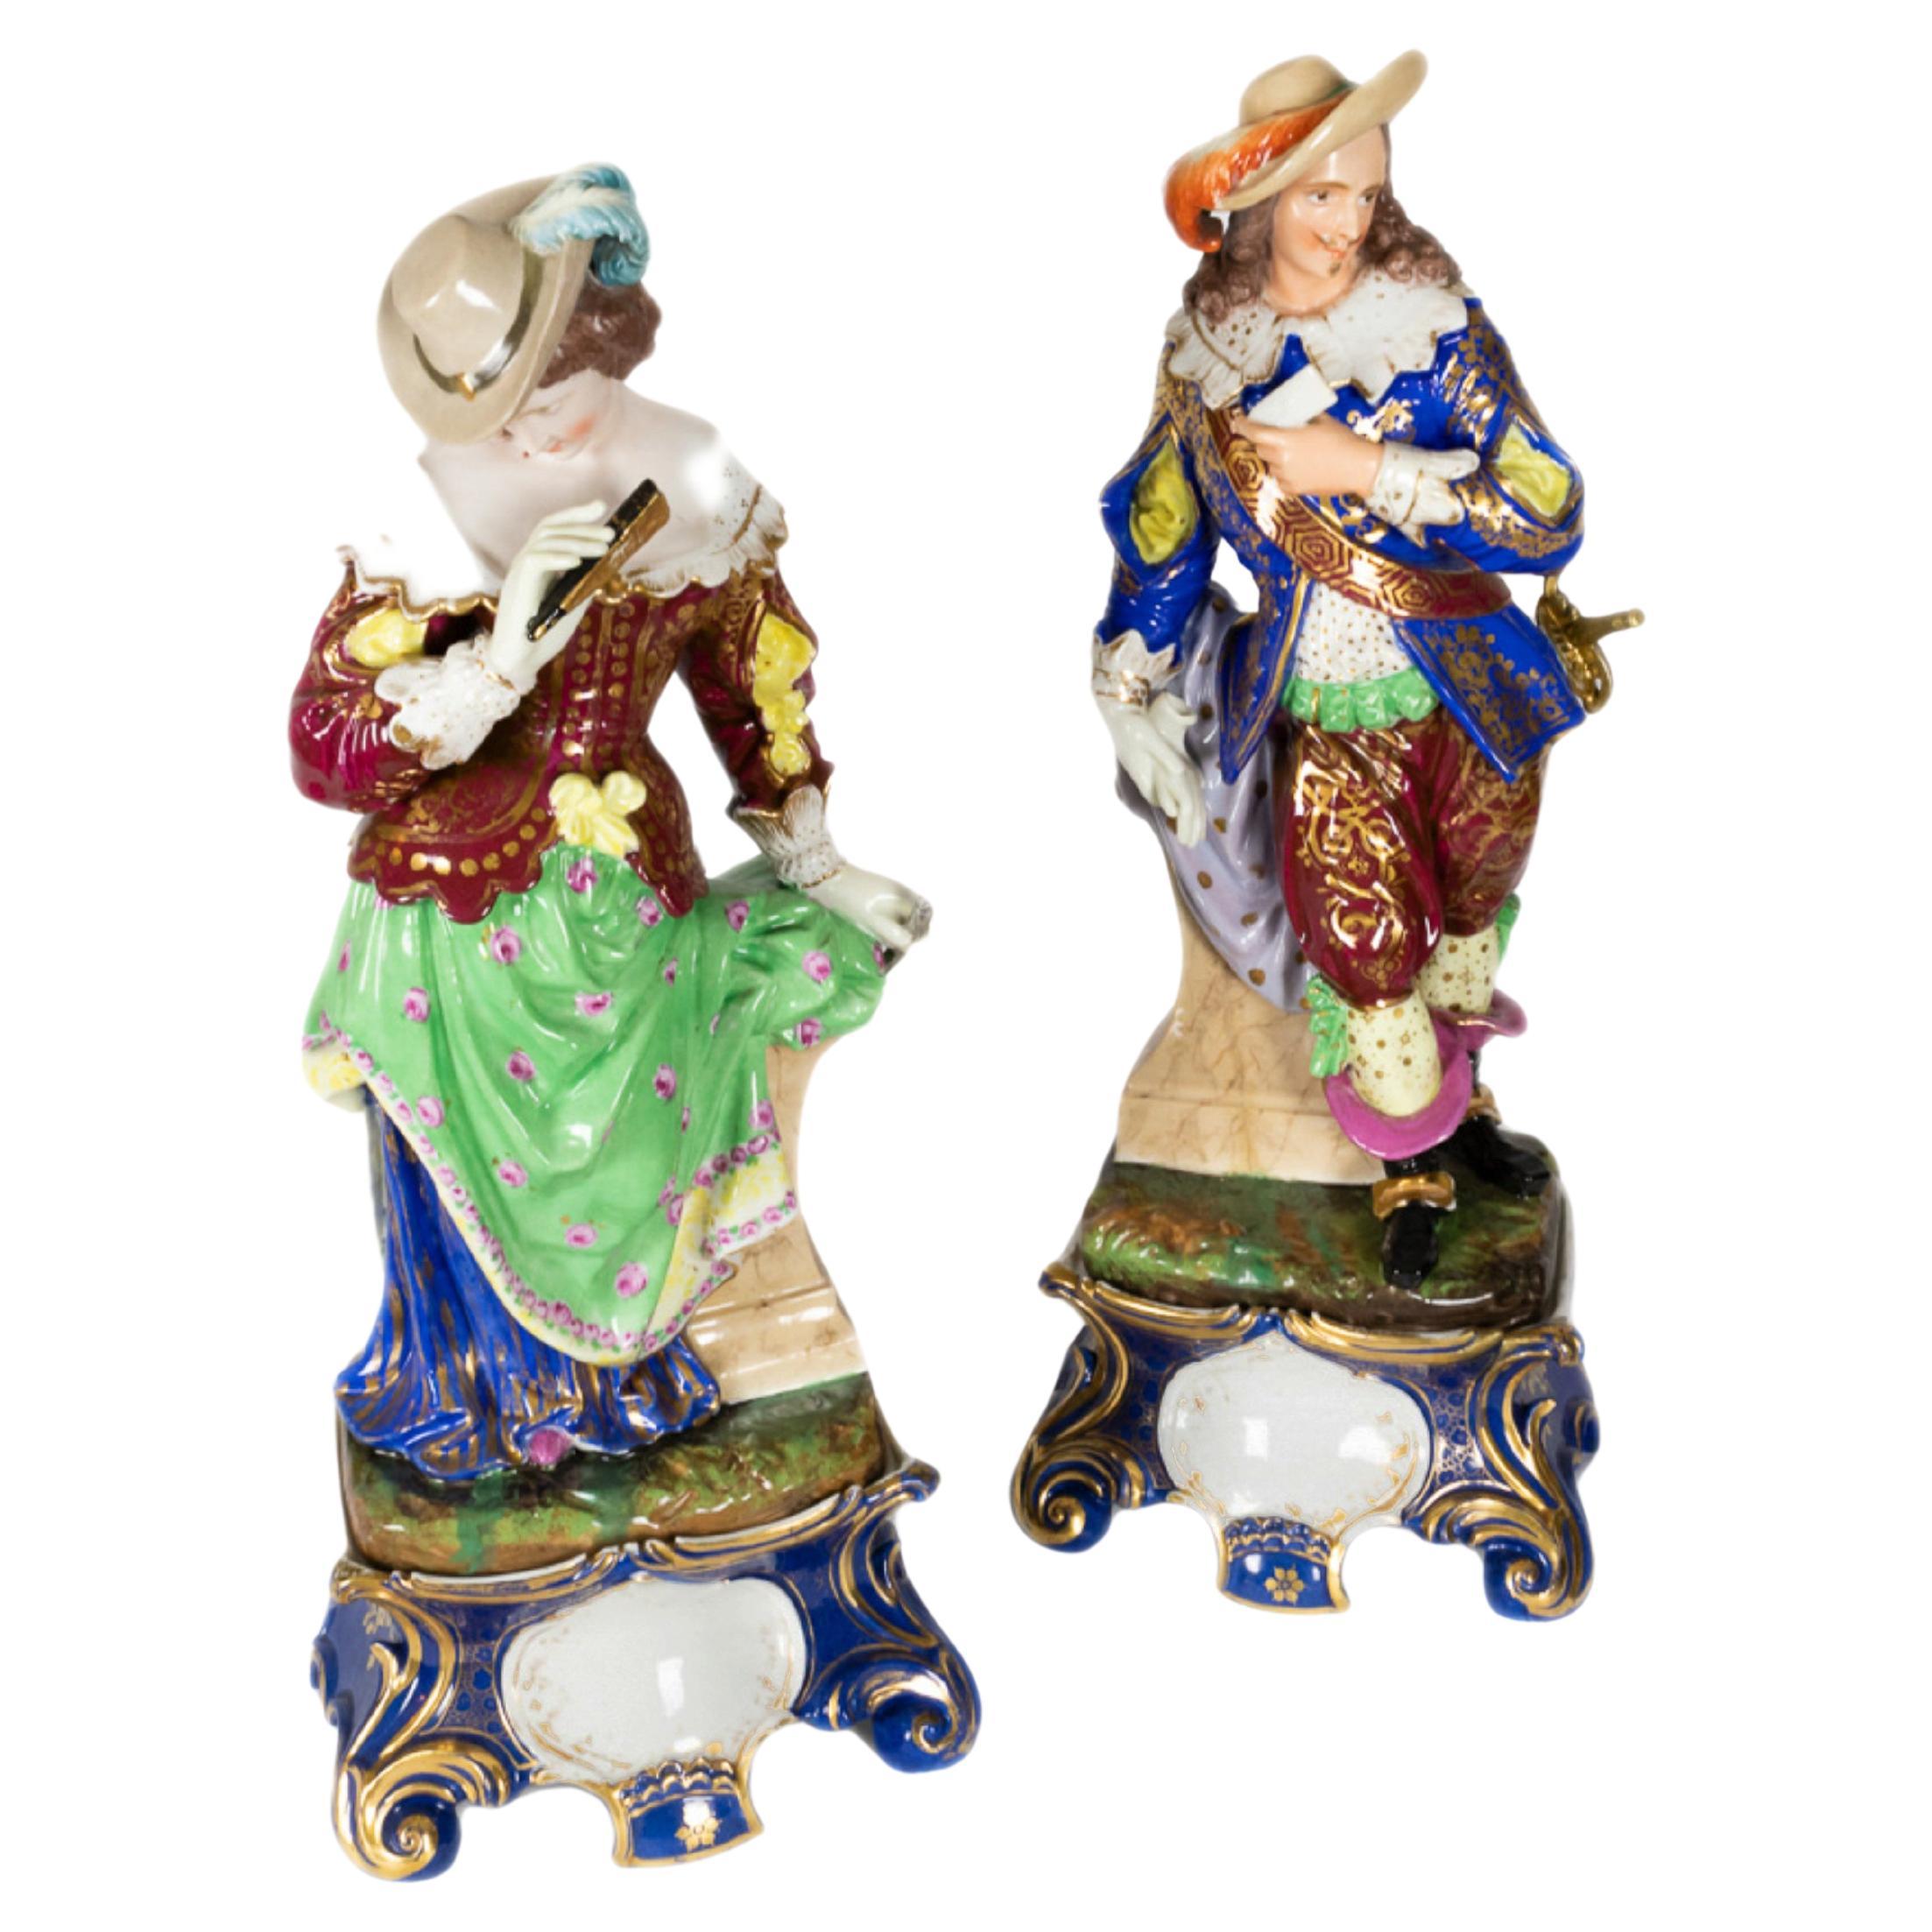 Musketeer & Lady Porcelain Statues, 20th Century